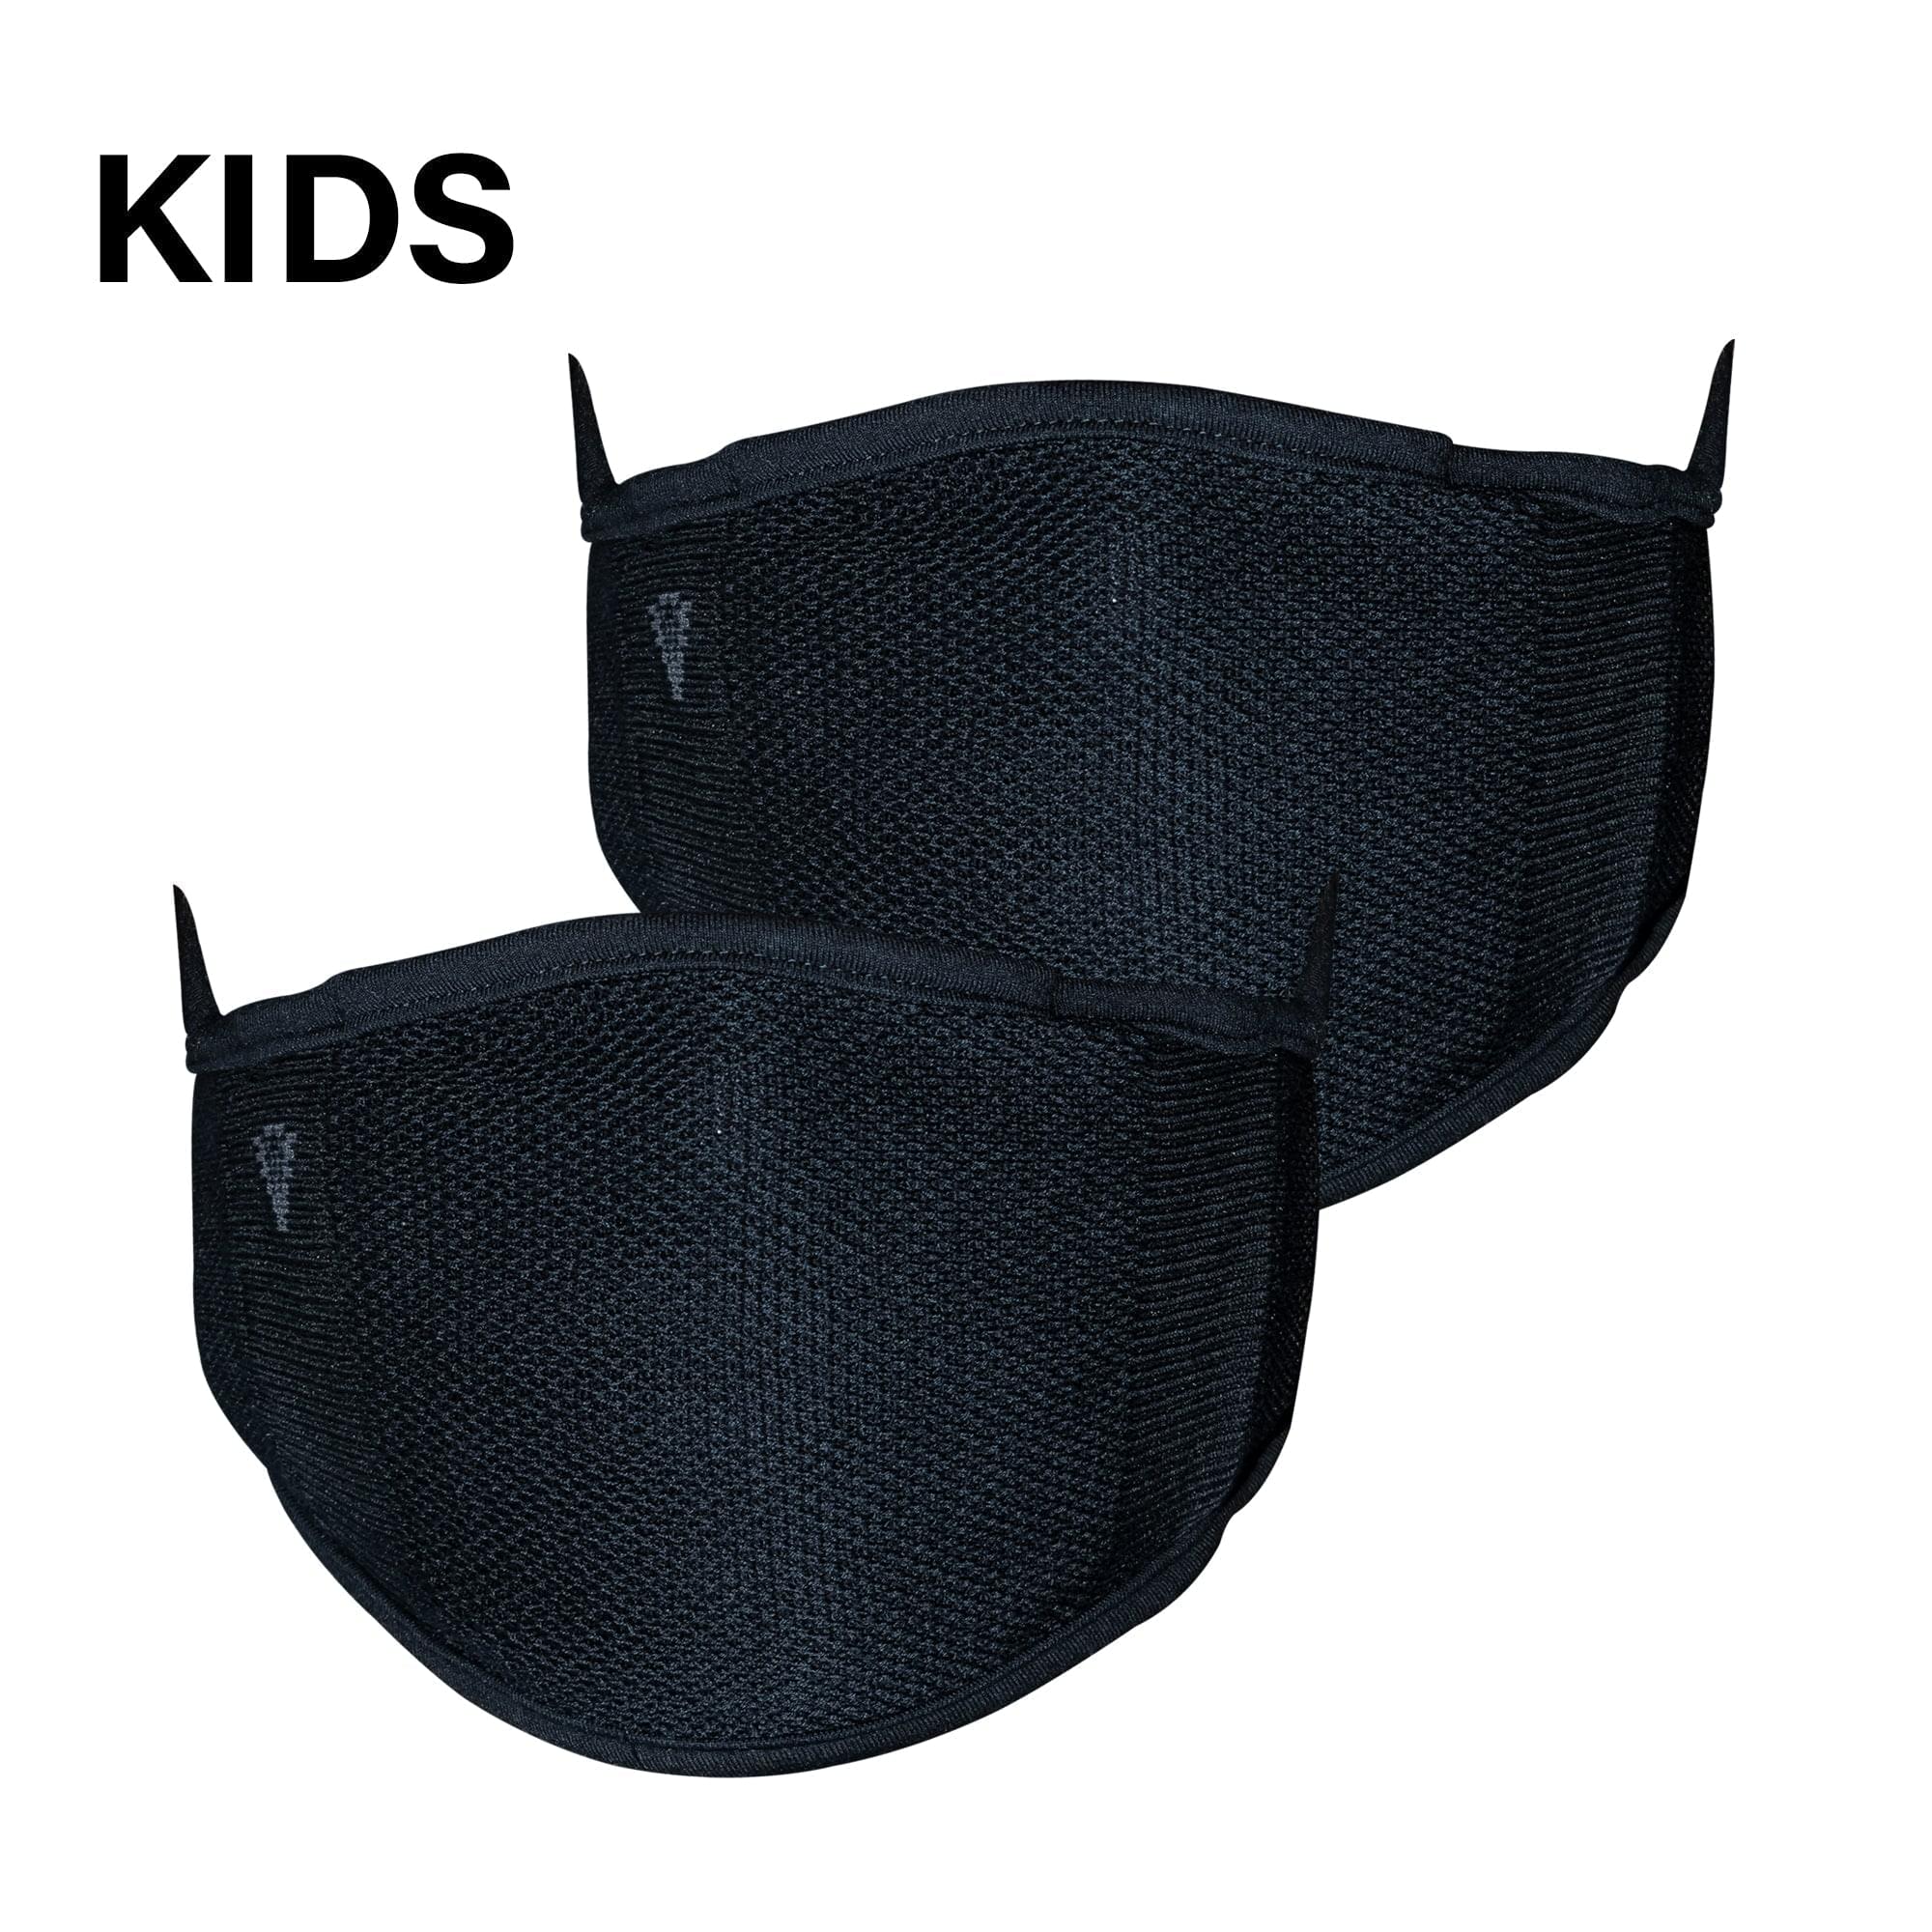 2-Layer Anti-Bacterial Protection Mask for Kids, Size- Small (3-7 Yrs) - Pack of 2